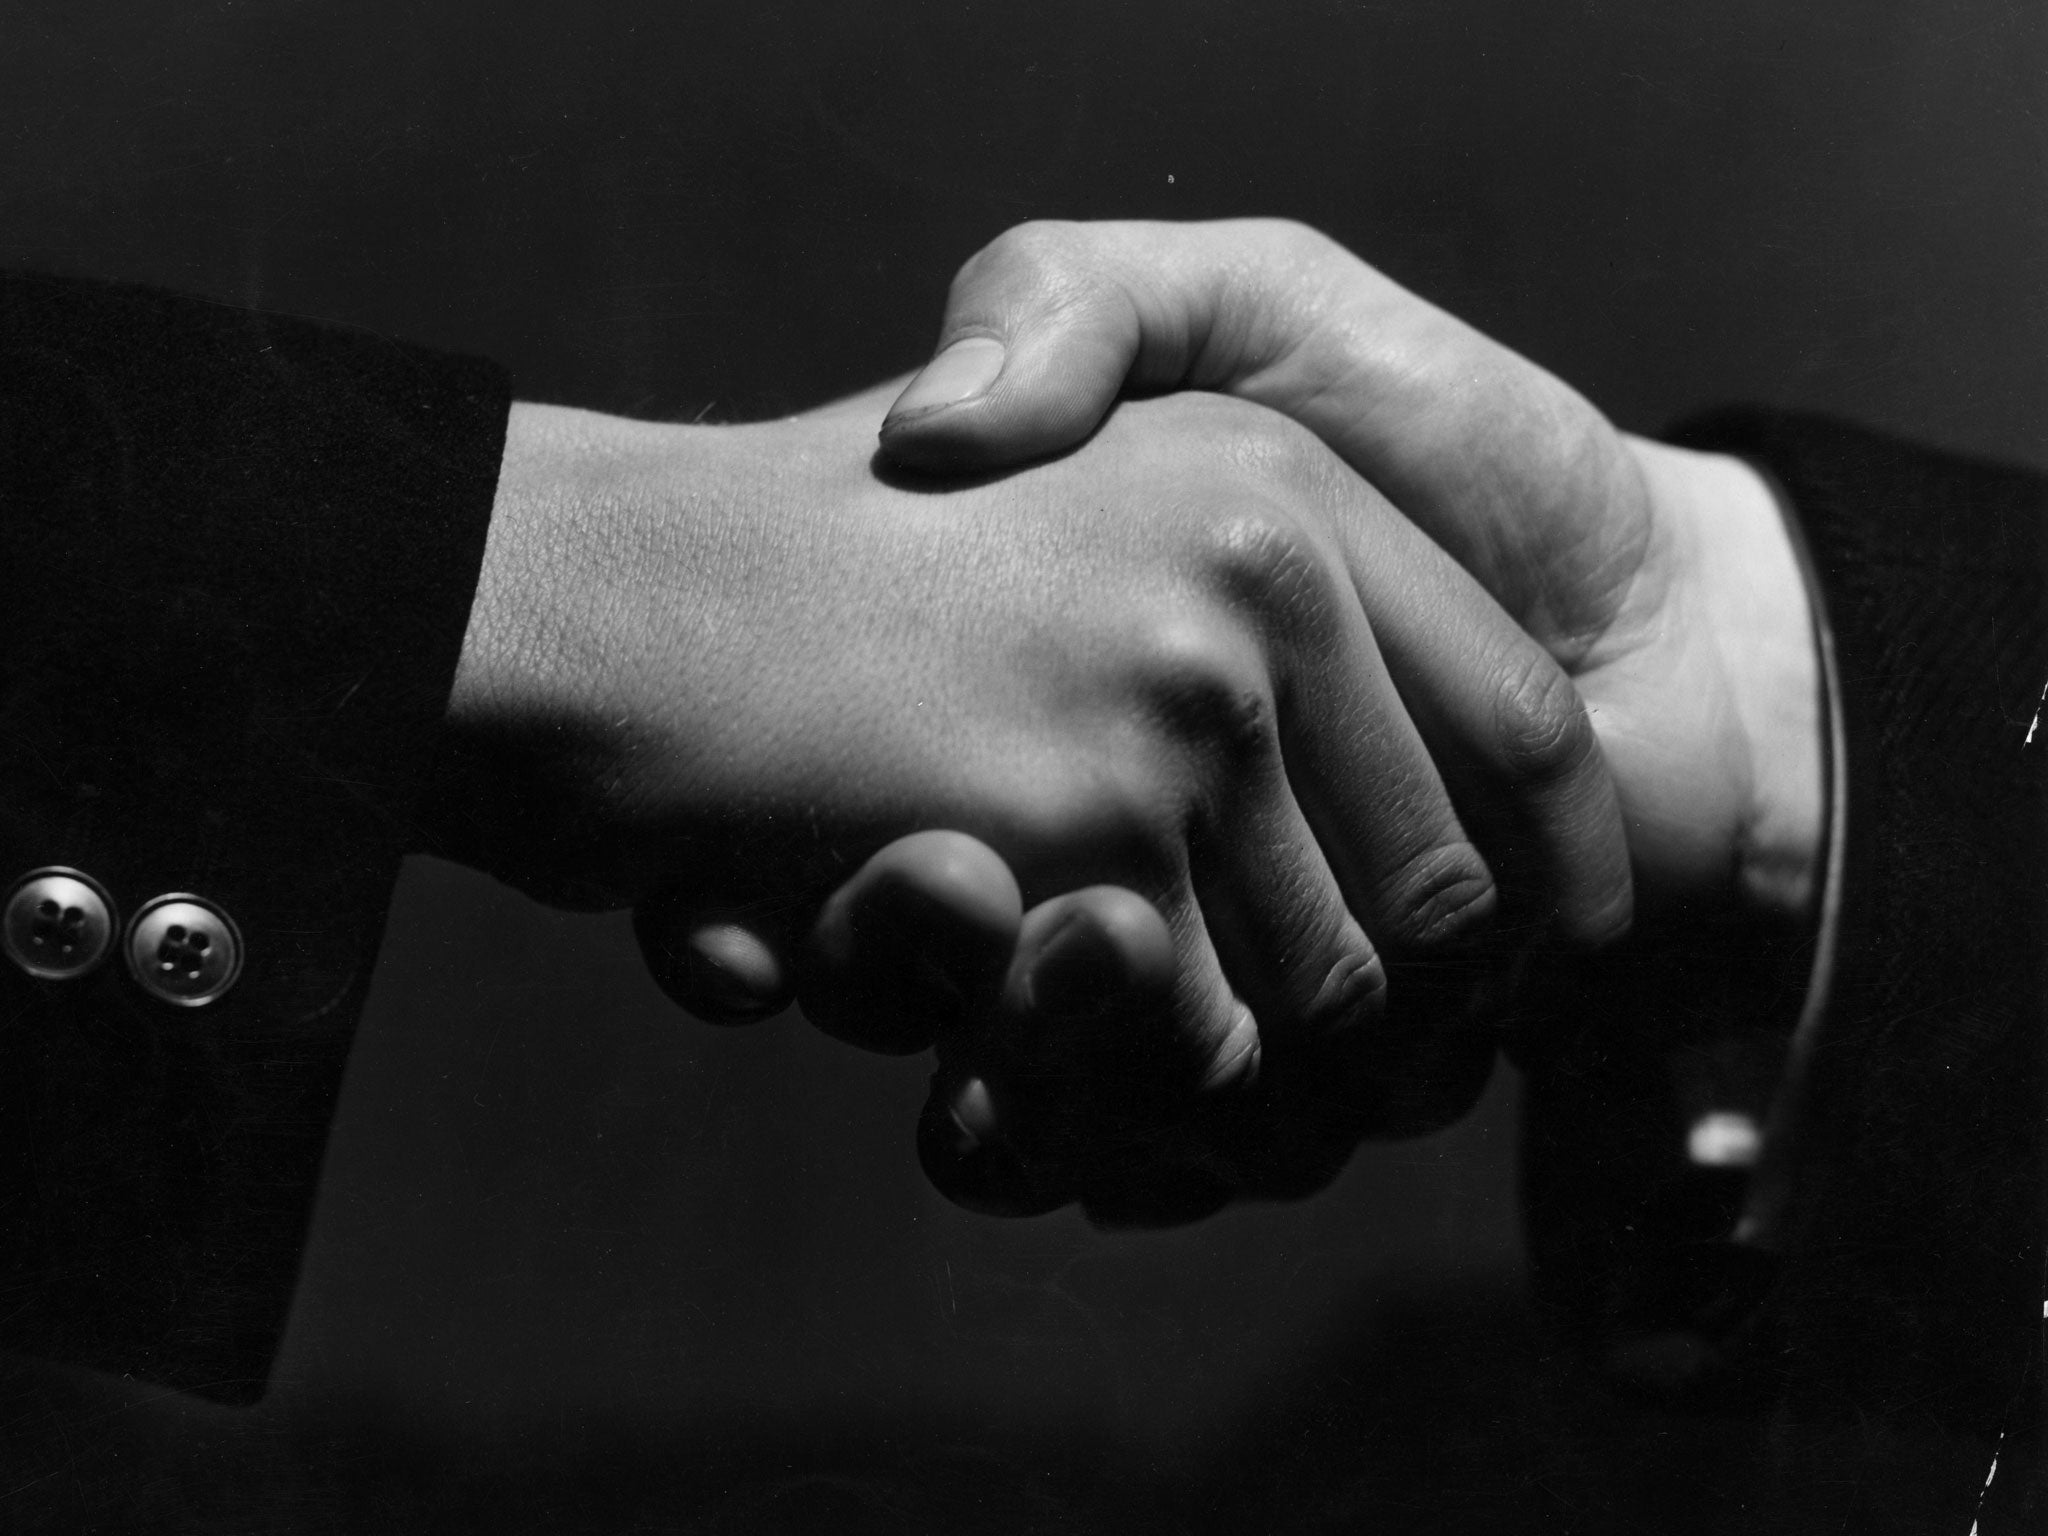 Court rules handshakes 'deeply rooted' in German life